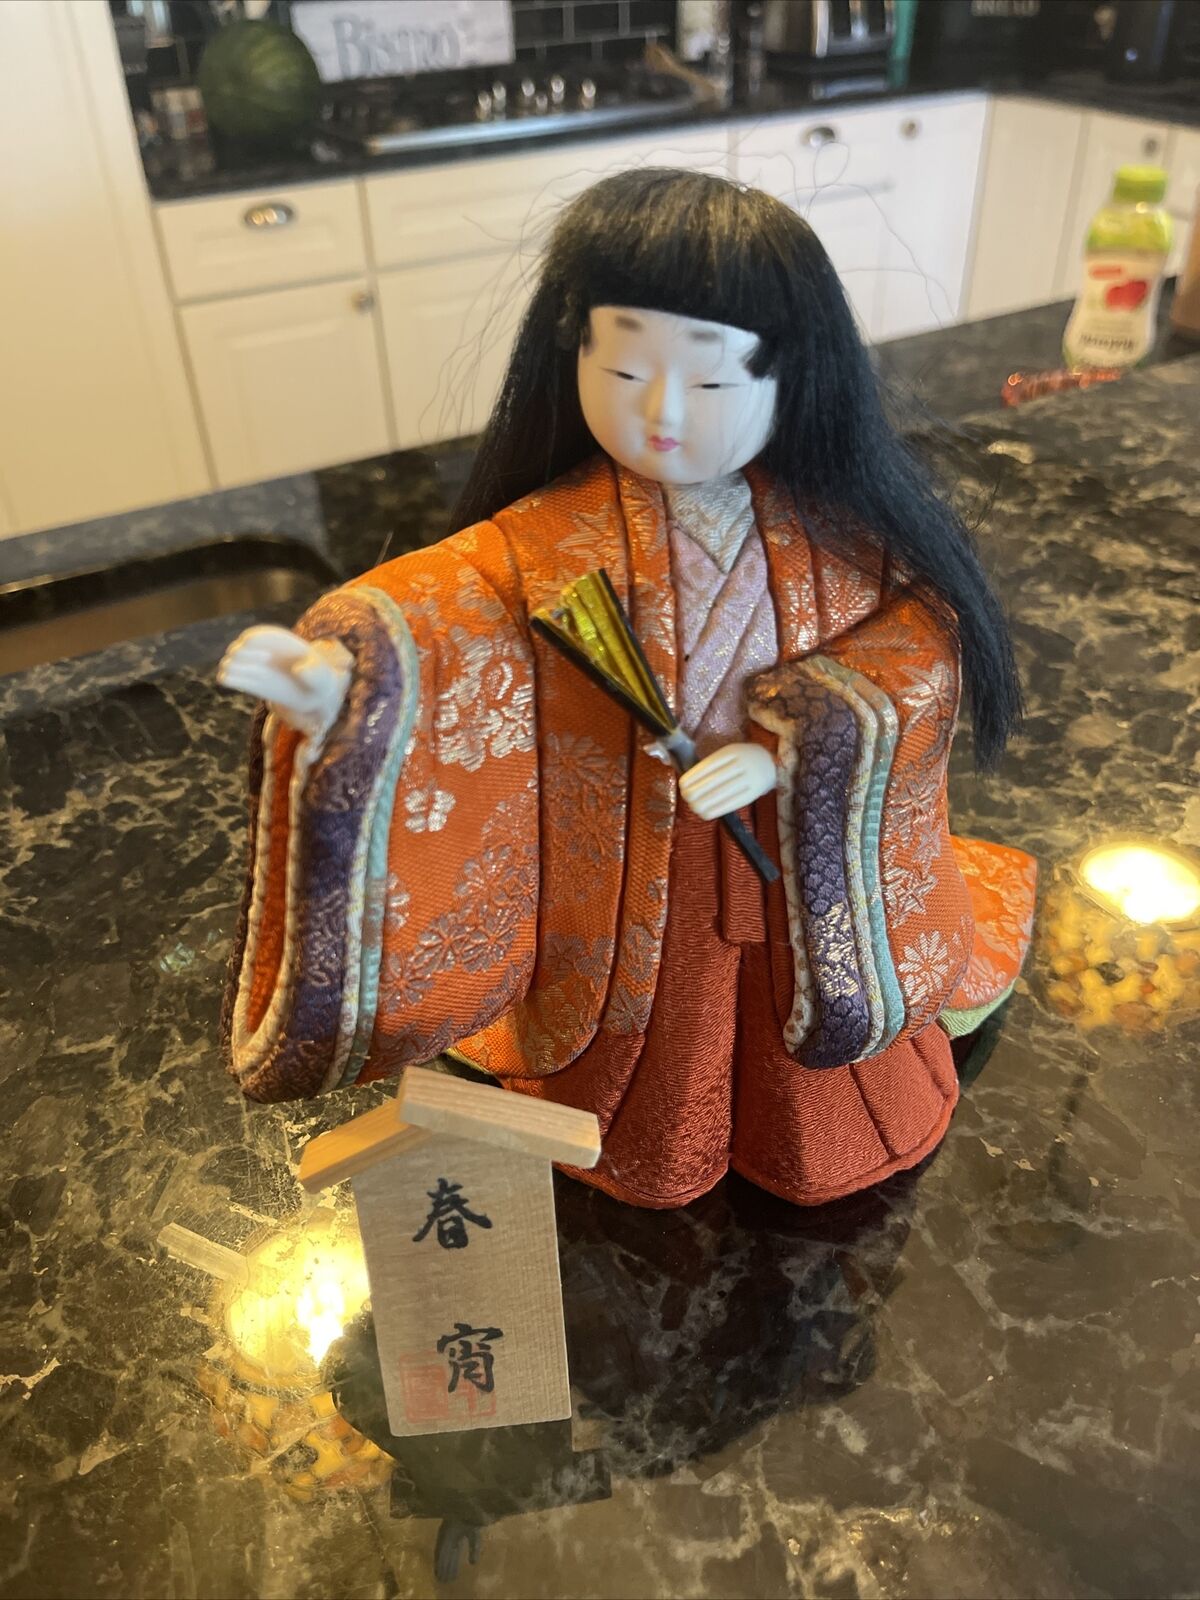 Stunning Vintage  Japanese Girl Doll In Orange And Gold Outfit